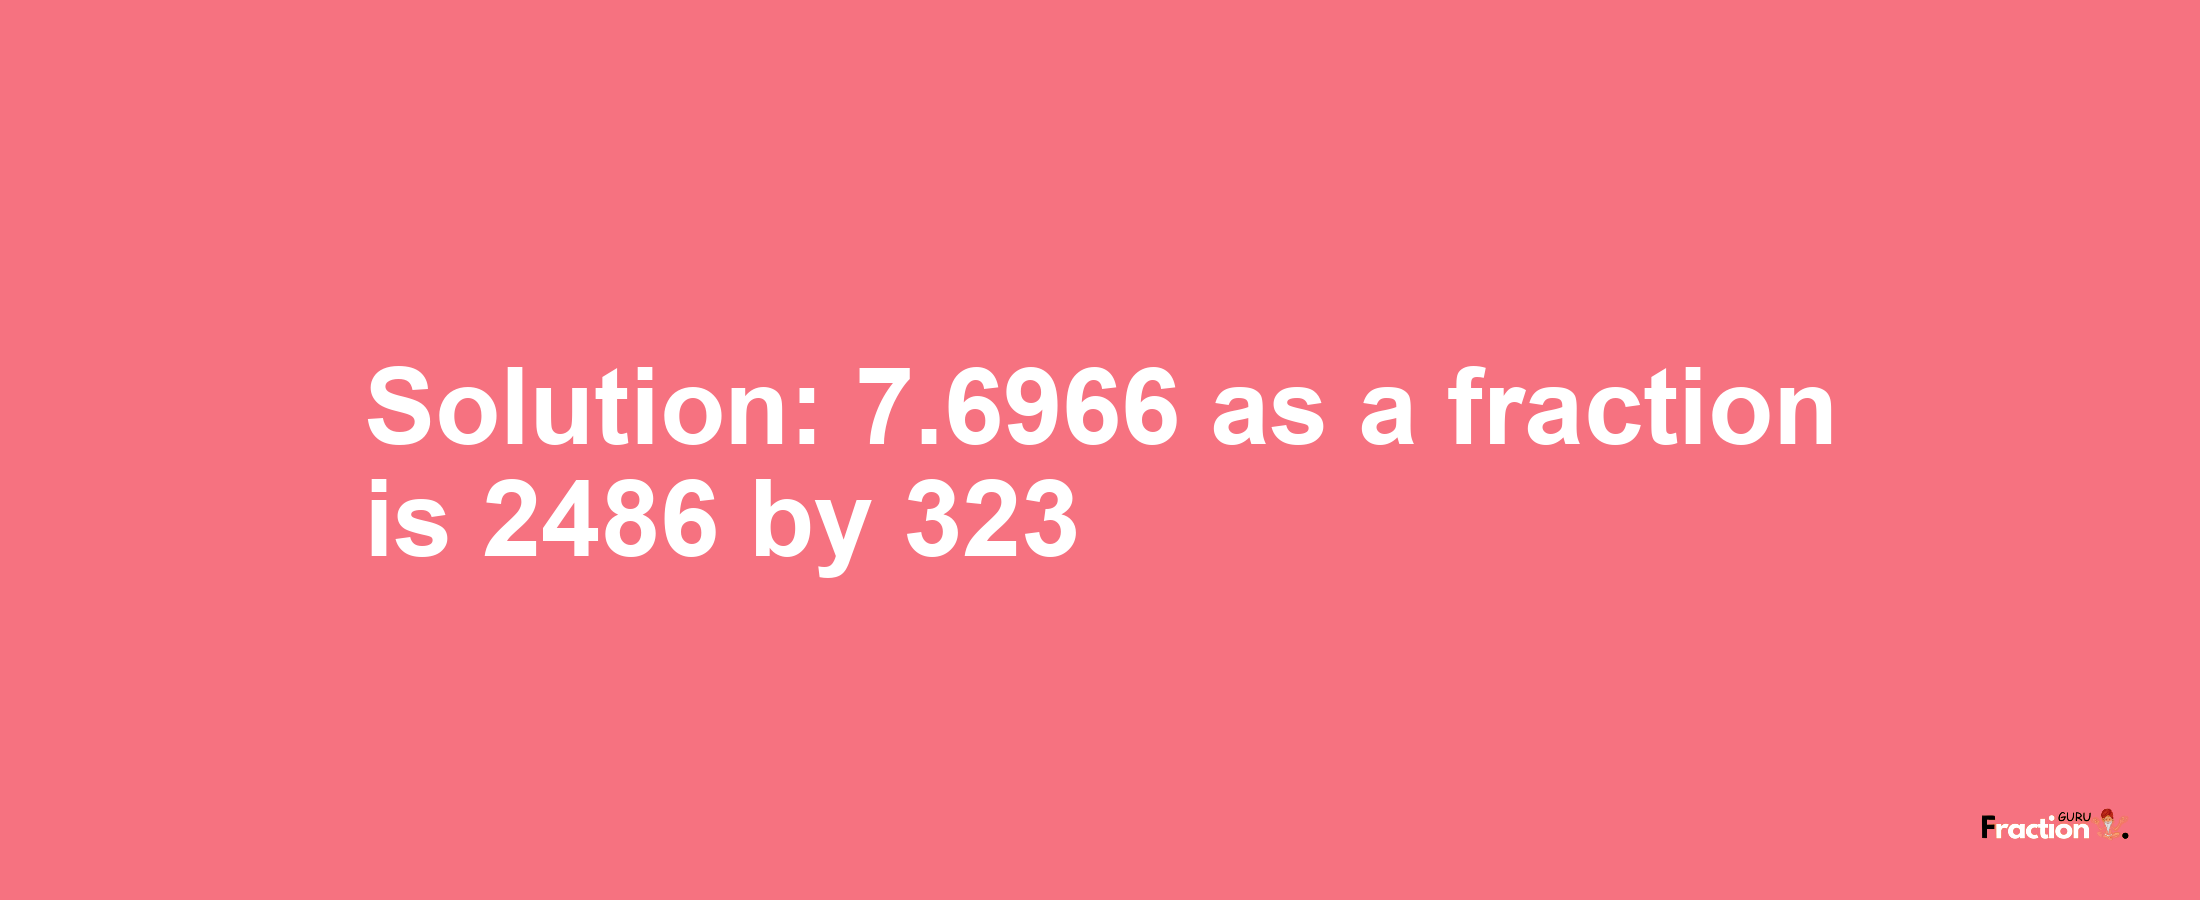 Solution:7.6966 as a fraction is 2486/323